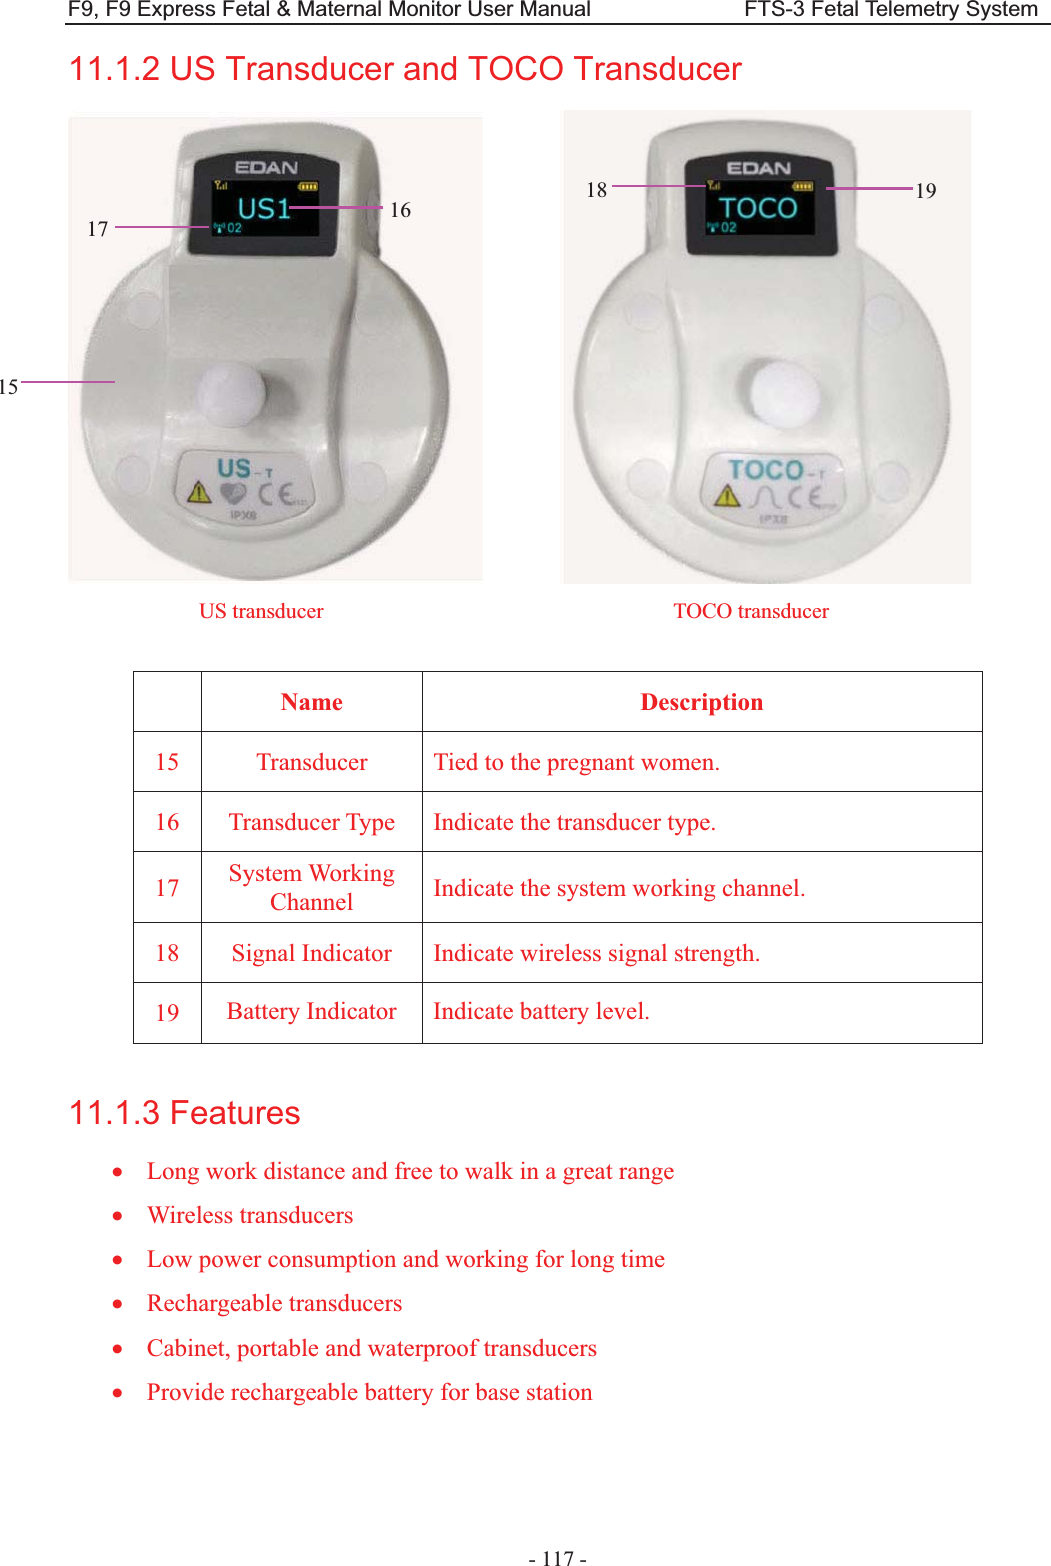 F9, F9 Express Fetal &amp; Maternal Monitor User Manual                            FTS-3 Fetal Telemetry System - 117 - 11.1.2 US Transducer and TOCO Transducer          US transducer                                TOCO transducer   Name  Description 15  Transducer  Tied to the pregnant women. 16  Transducer Type    Indicate the transducer type. 17  System Working Channel  Indicate the system working channel. 18  Signal Indicator  Indicate wireless signal strength. 19  Battery Indicator    Indicate battery level.  11.1.3 Features x Long work distance and free to walk in a great range   x Wireless transducers   x Low power consumption and working for long time x Rechargeable transducers x Cabinet, portable and waterproof transducers x Provide rechargeable battery for base station   16 15 17 18  19 